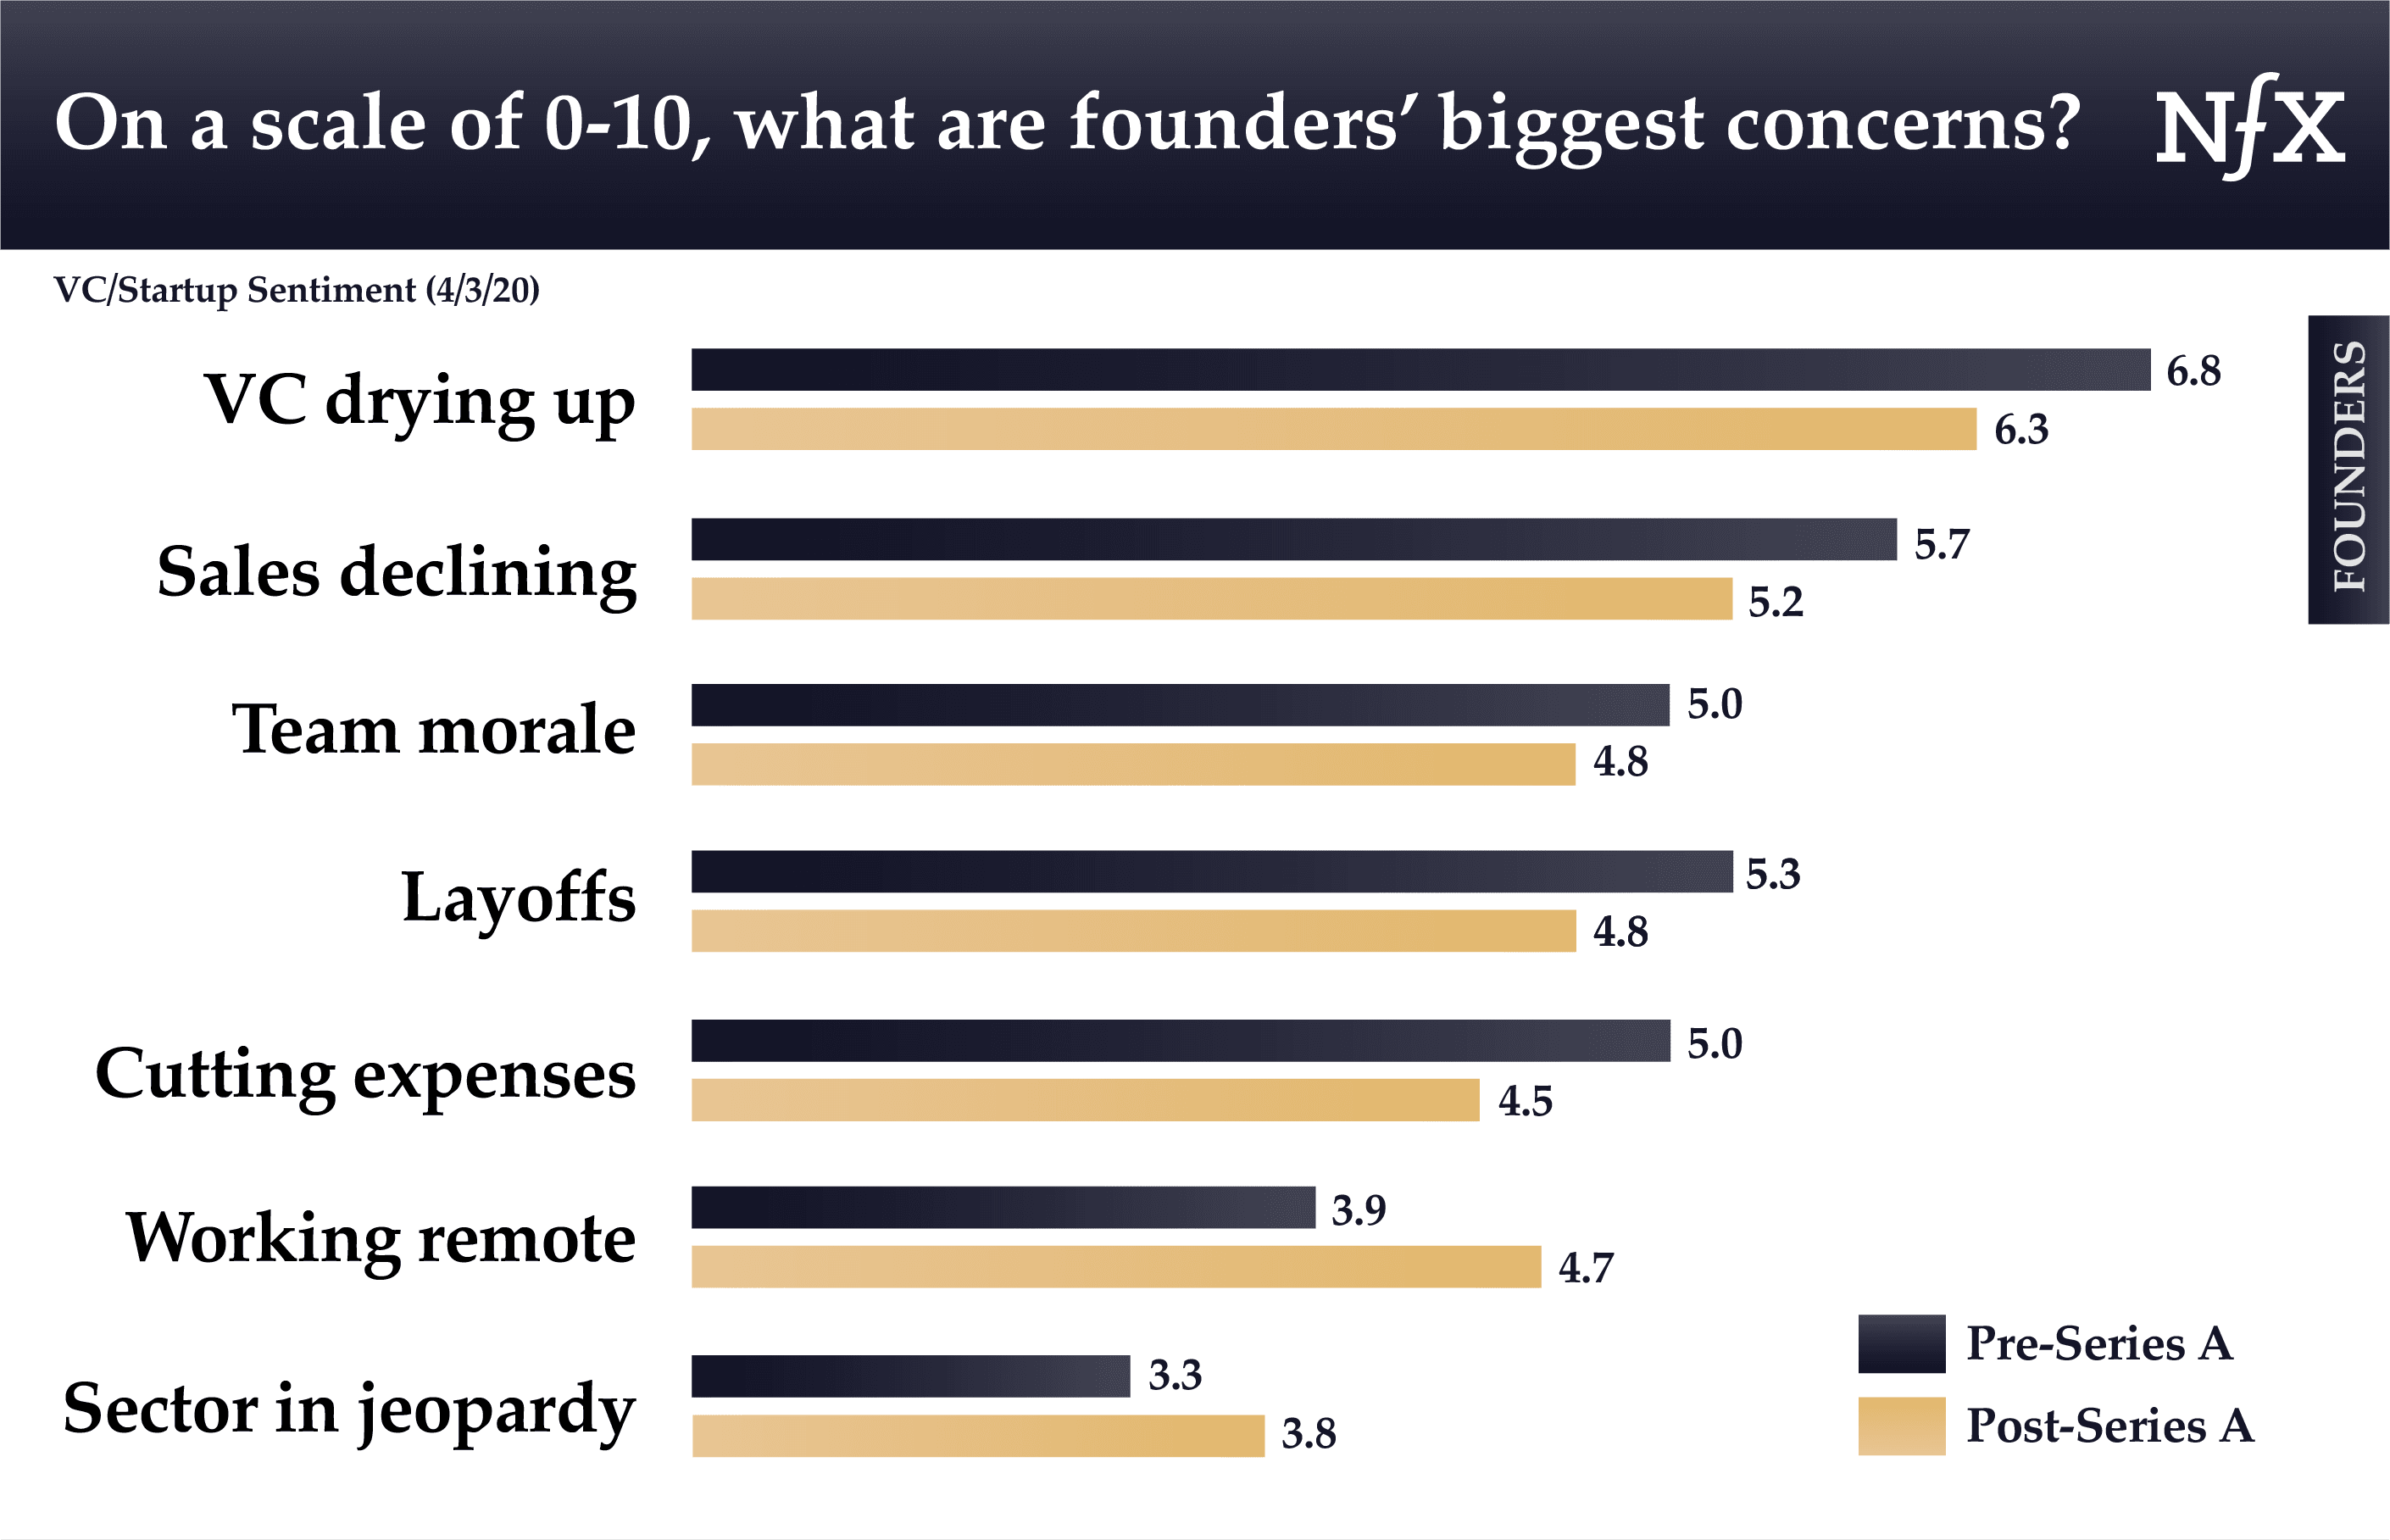 On scale 0-10, what are founders' biggest concerns during COVID-19?